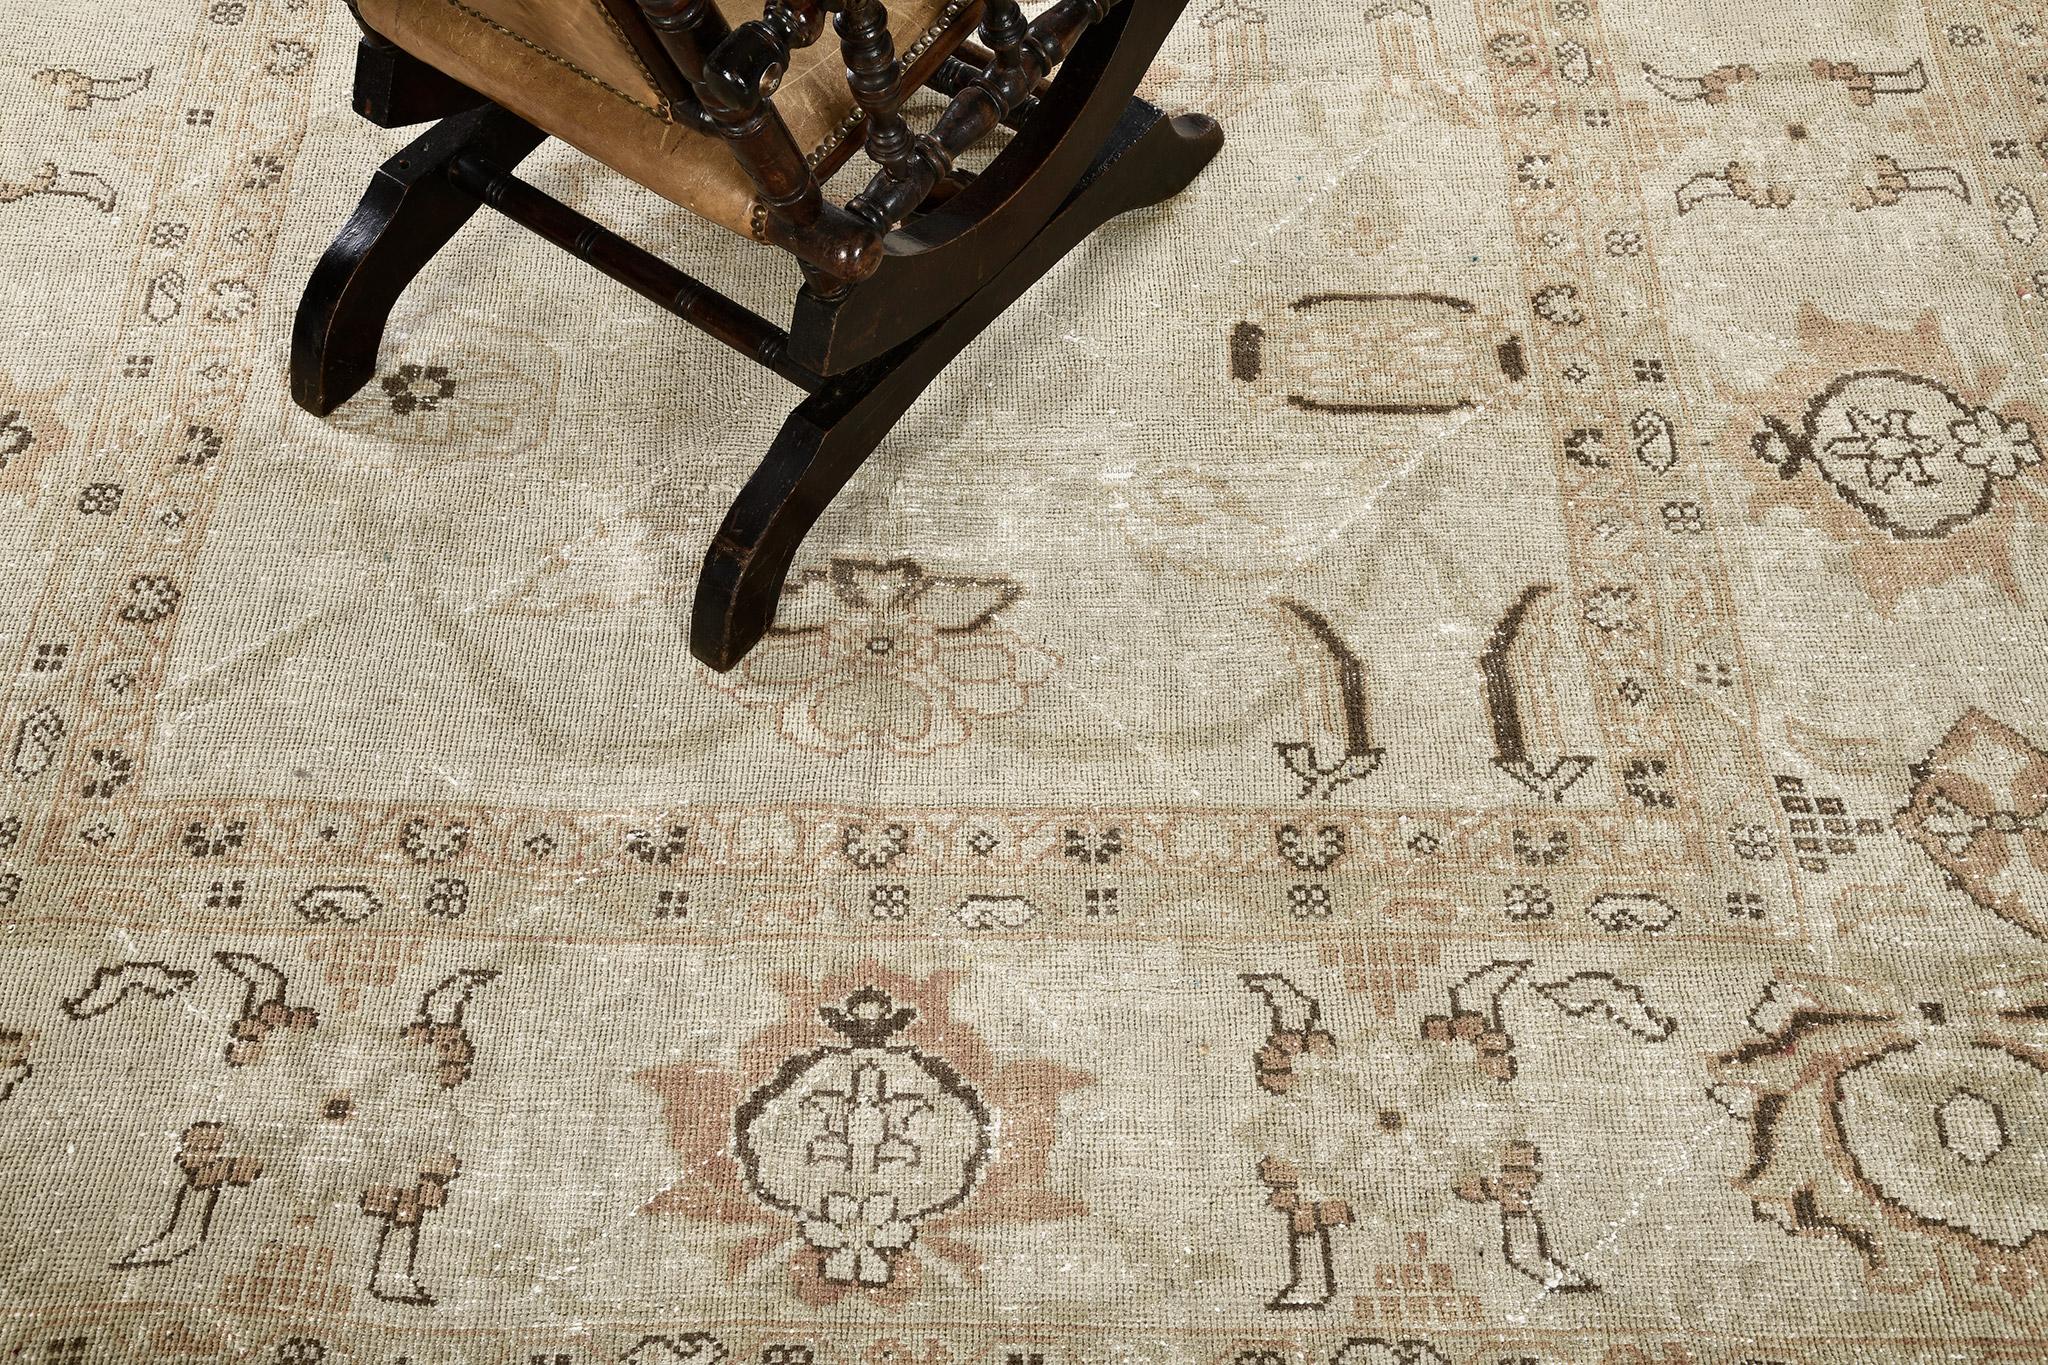 This enchanting timeless Sultanabad Rug has its asymmetrical patterns that makes the rug unique. A one of a kind rug that makes your interior more fascinating. Neutral tones features even the smallest details of the patterns and motifs. It looks